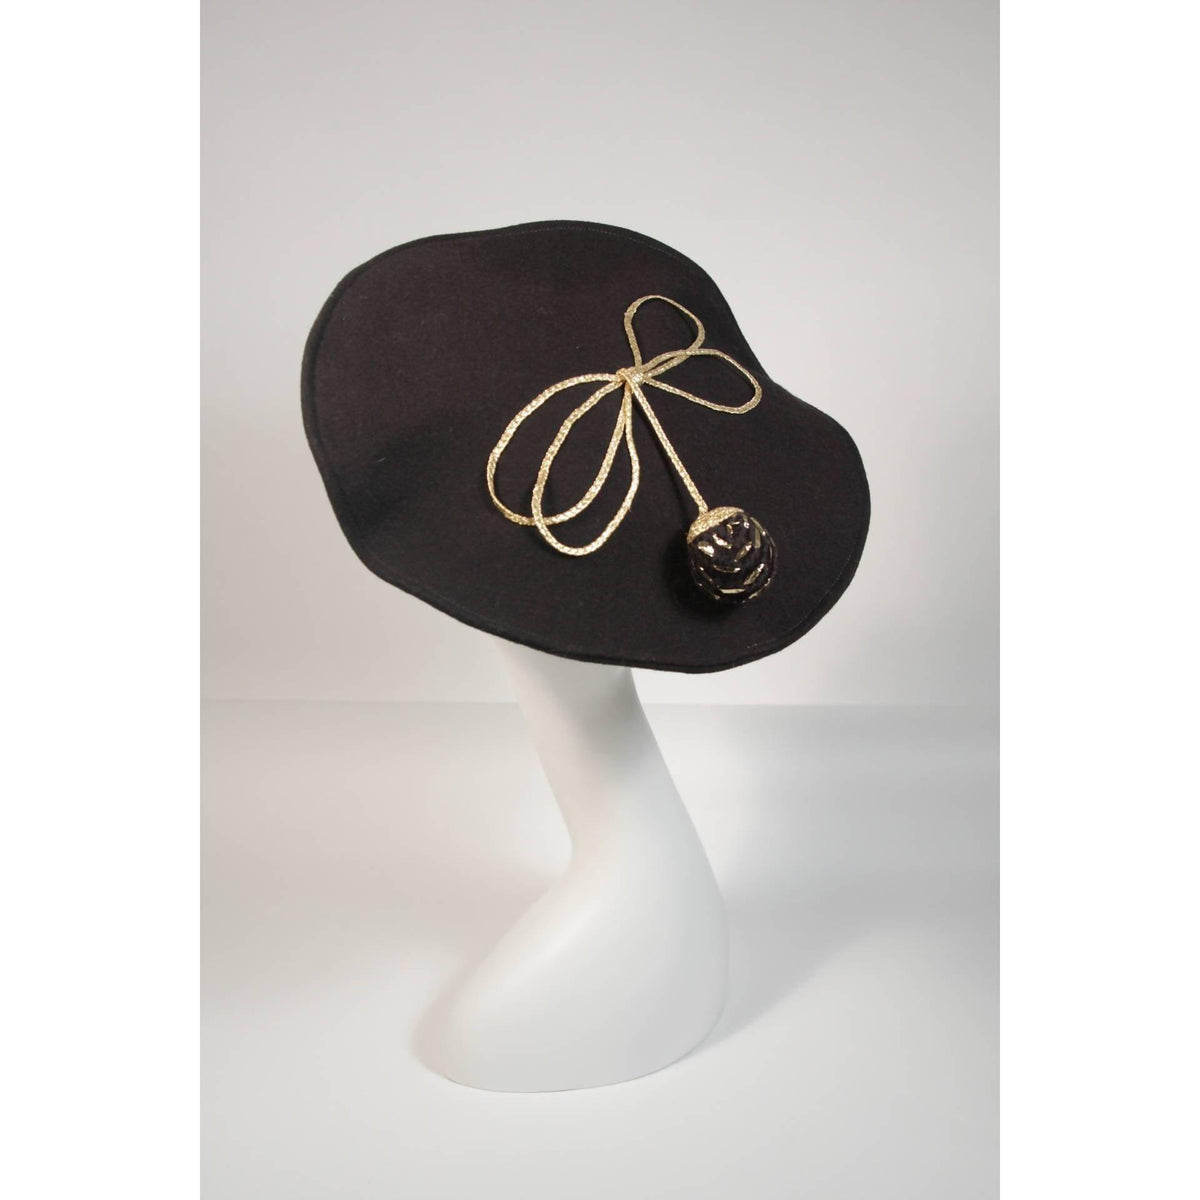 YVES SAINT LAURENT Rive Gauche Black Wool Beret with Knit Ball - theREMODA